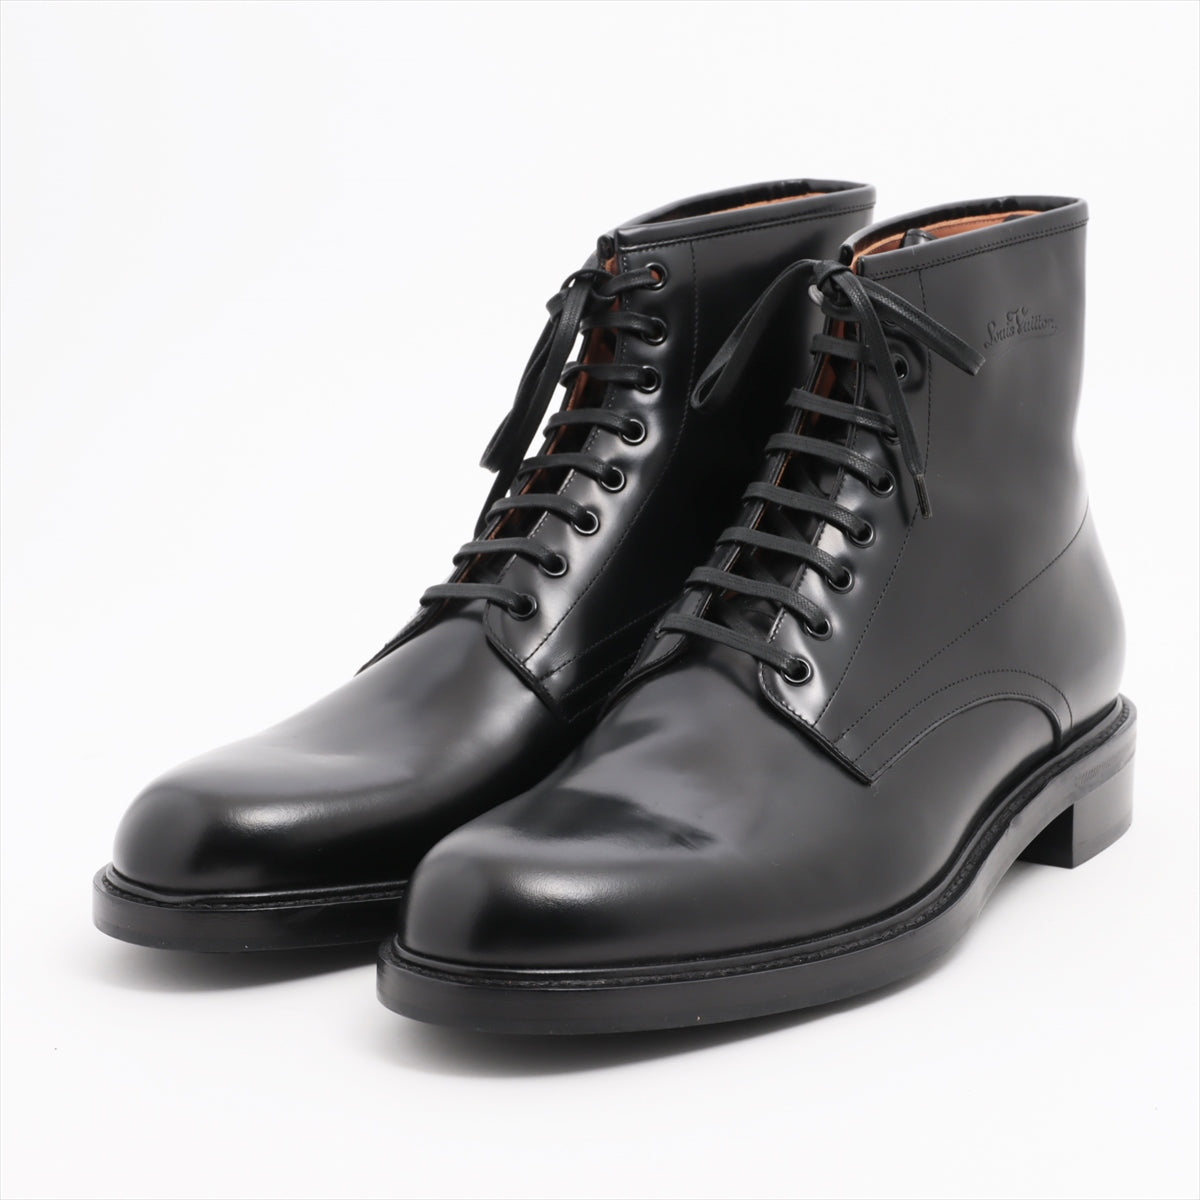 Louis Vuitton 16 years Leather Boots 9 1/2M Men's Black DI1106 Is there a replacement string